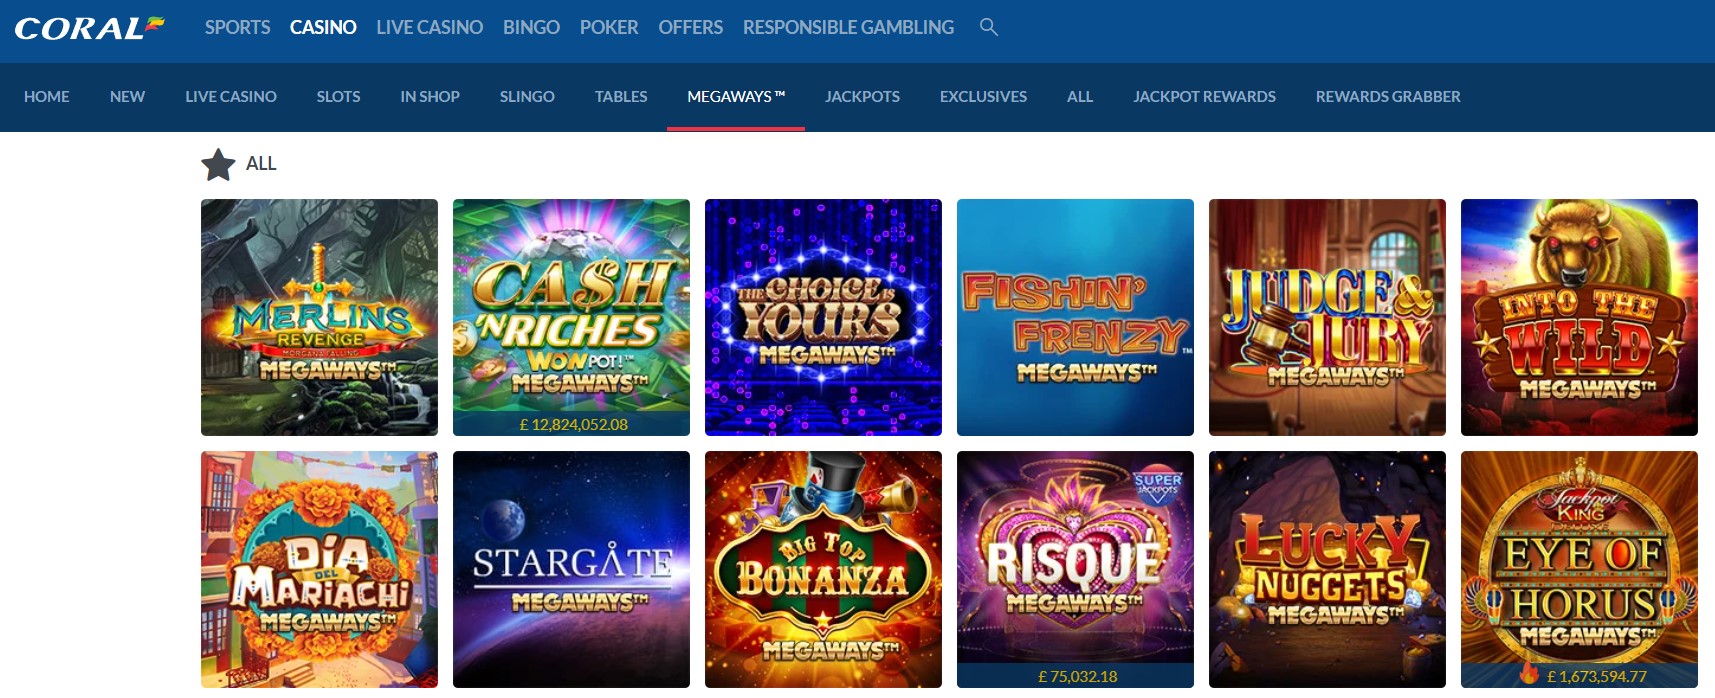 Preview № 1 of CoralCasino Games